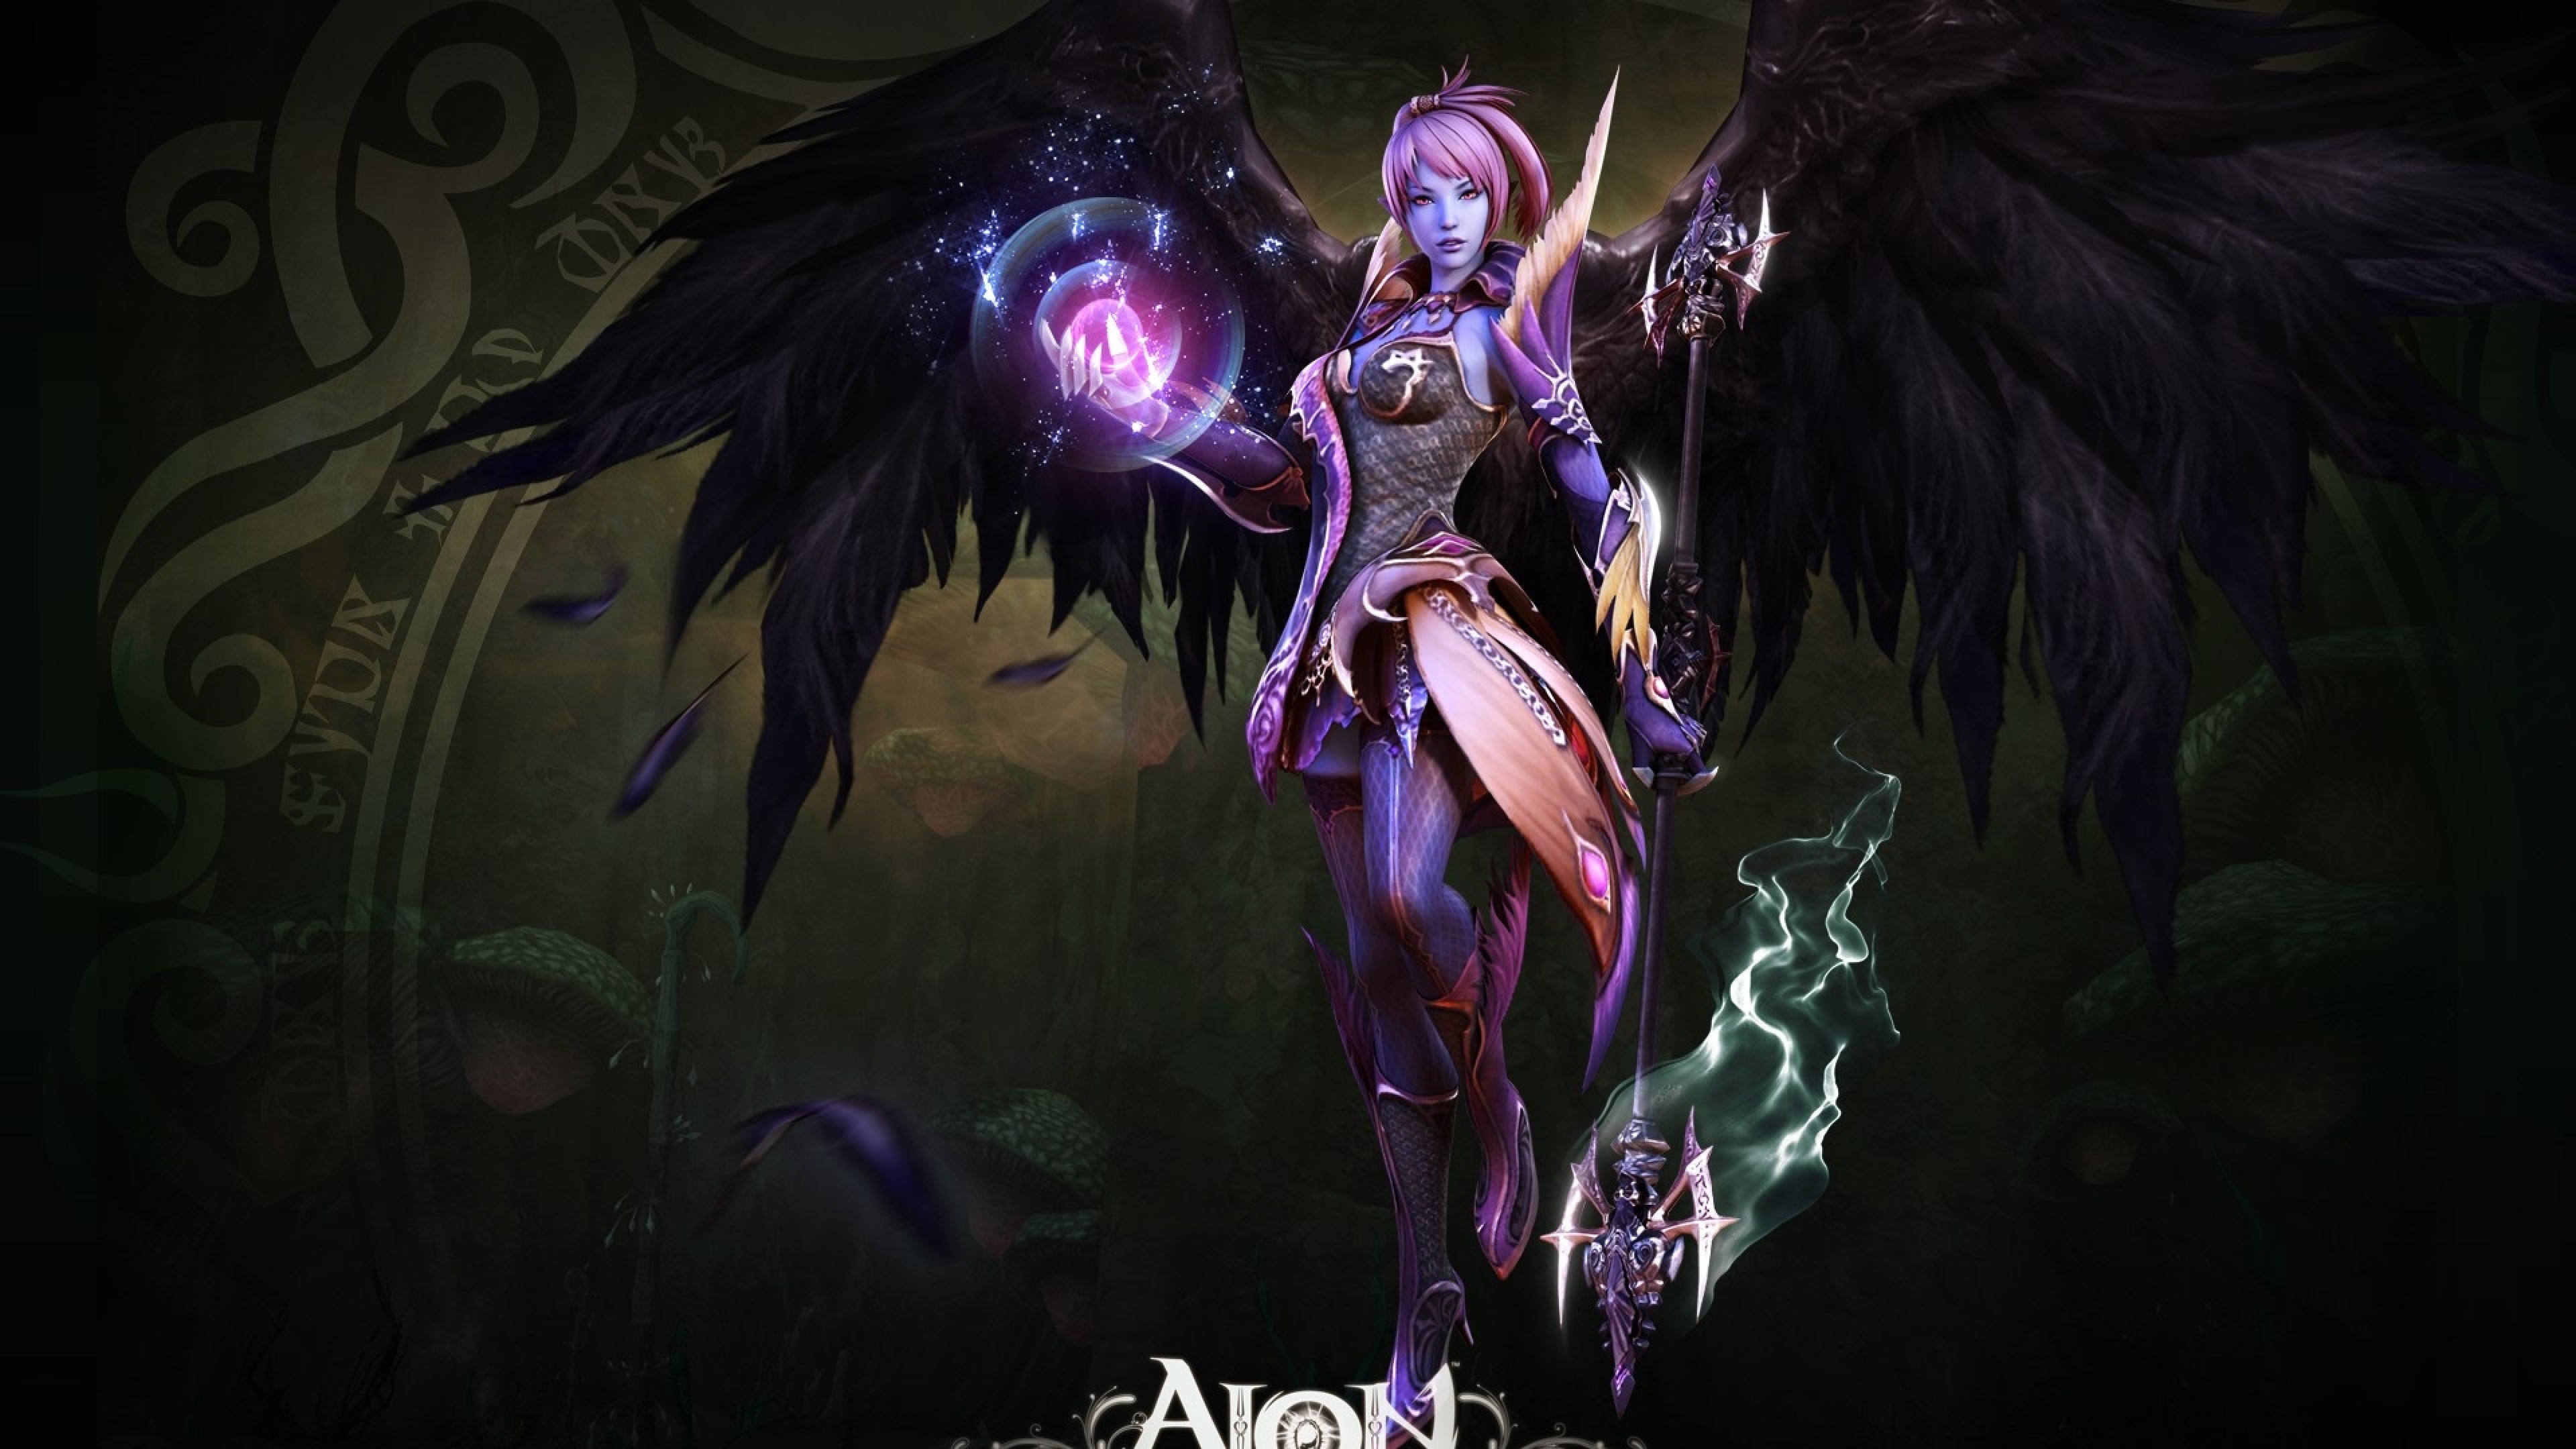 3840x2160  Wallpaper aion the tower of eternity, girl, staff, magic, dress